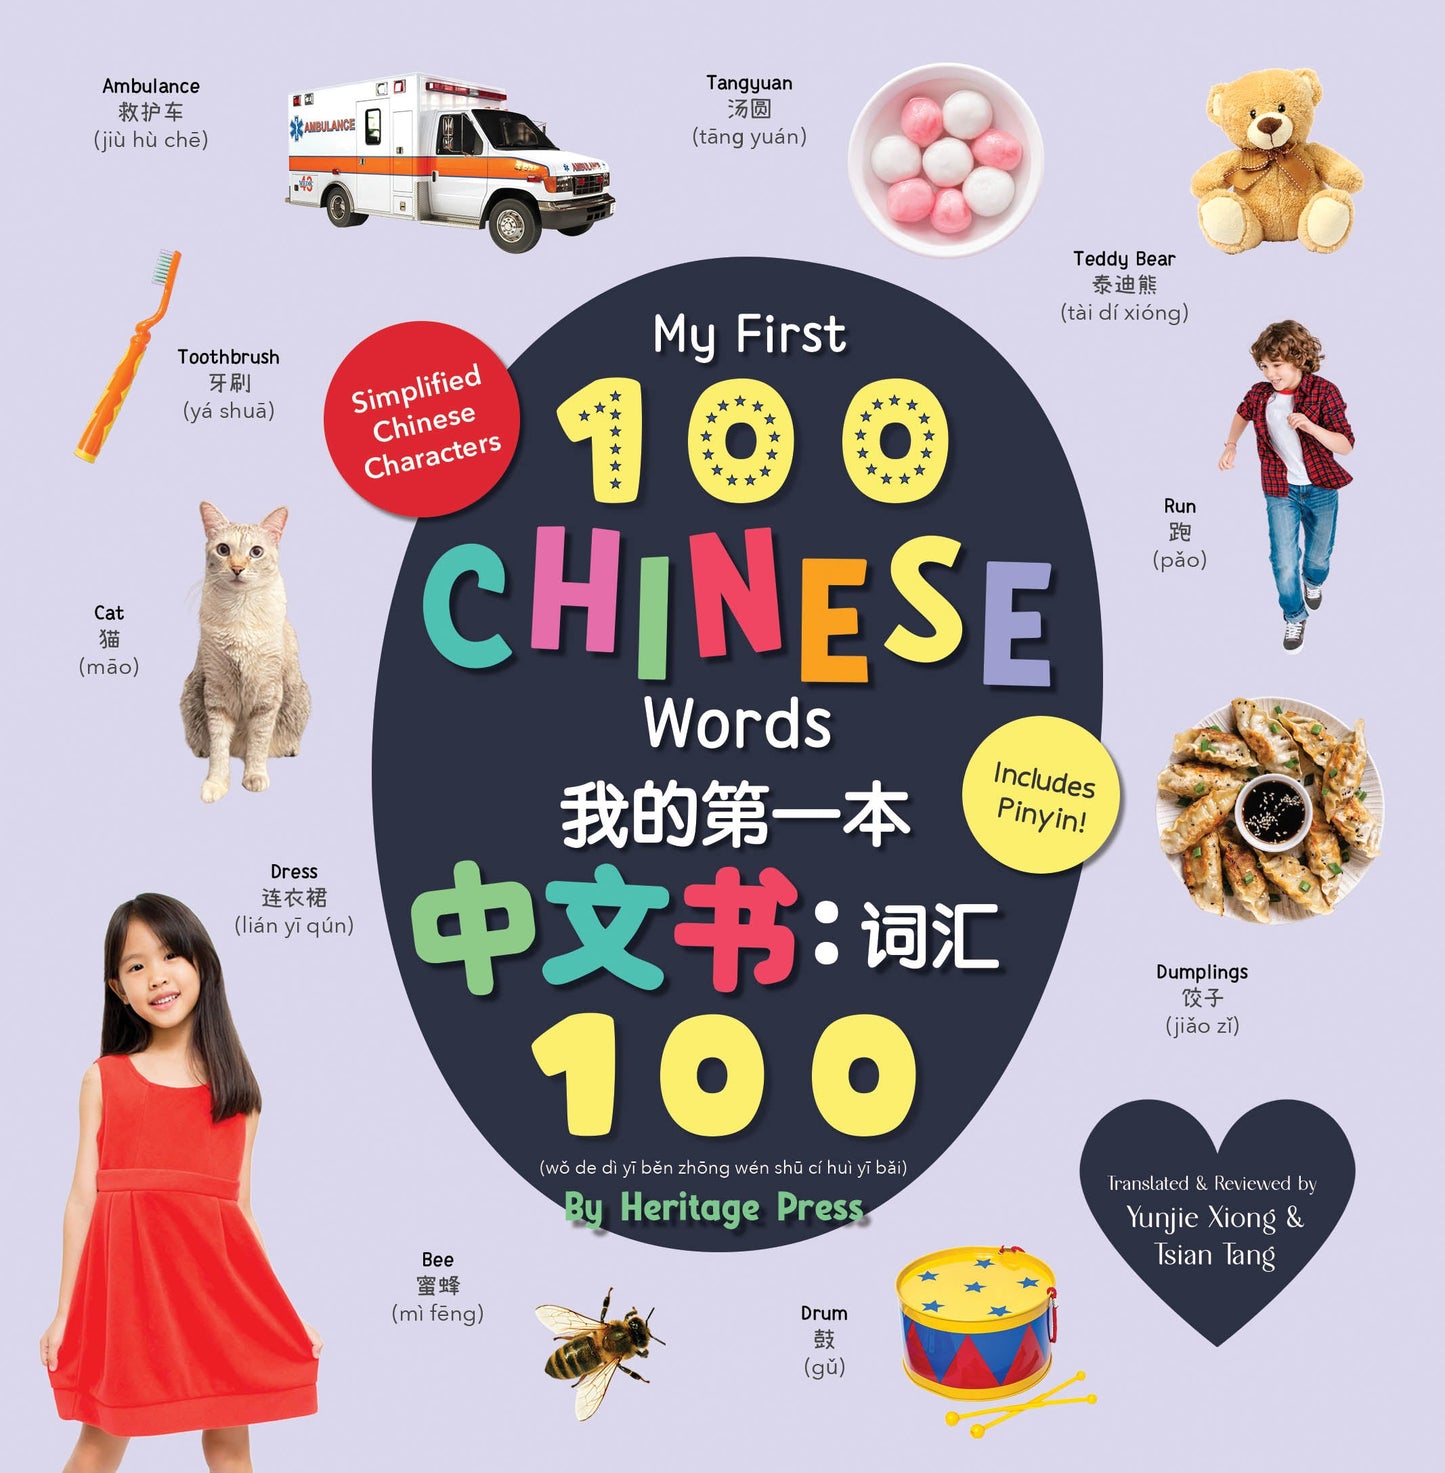 My First 100 Chinese Words / 我的第一本 中文书:词汇 100 (AMZ)